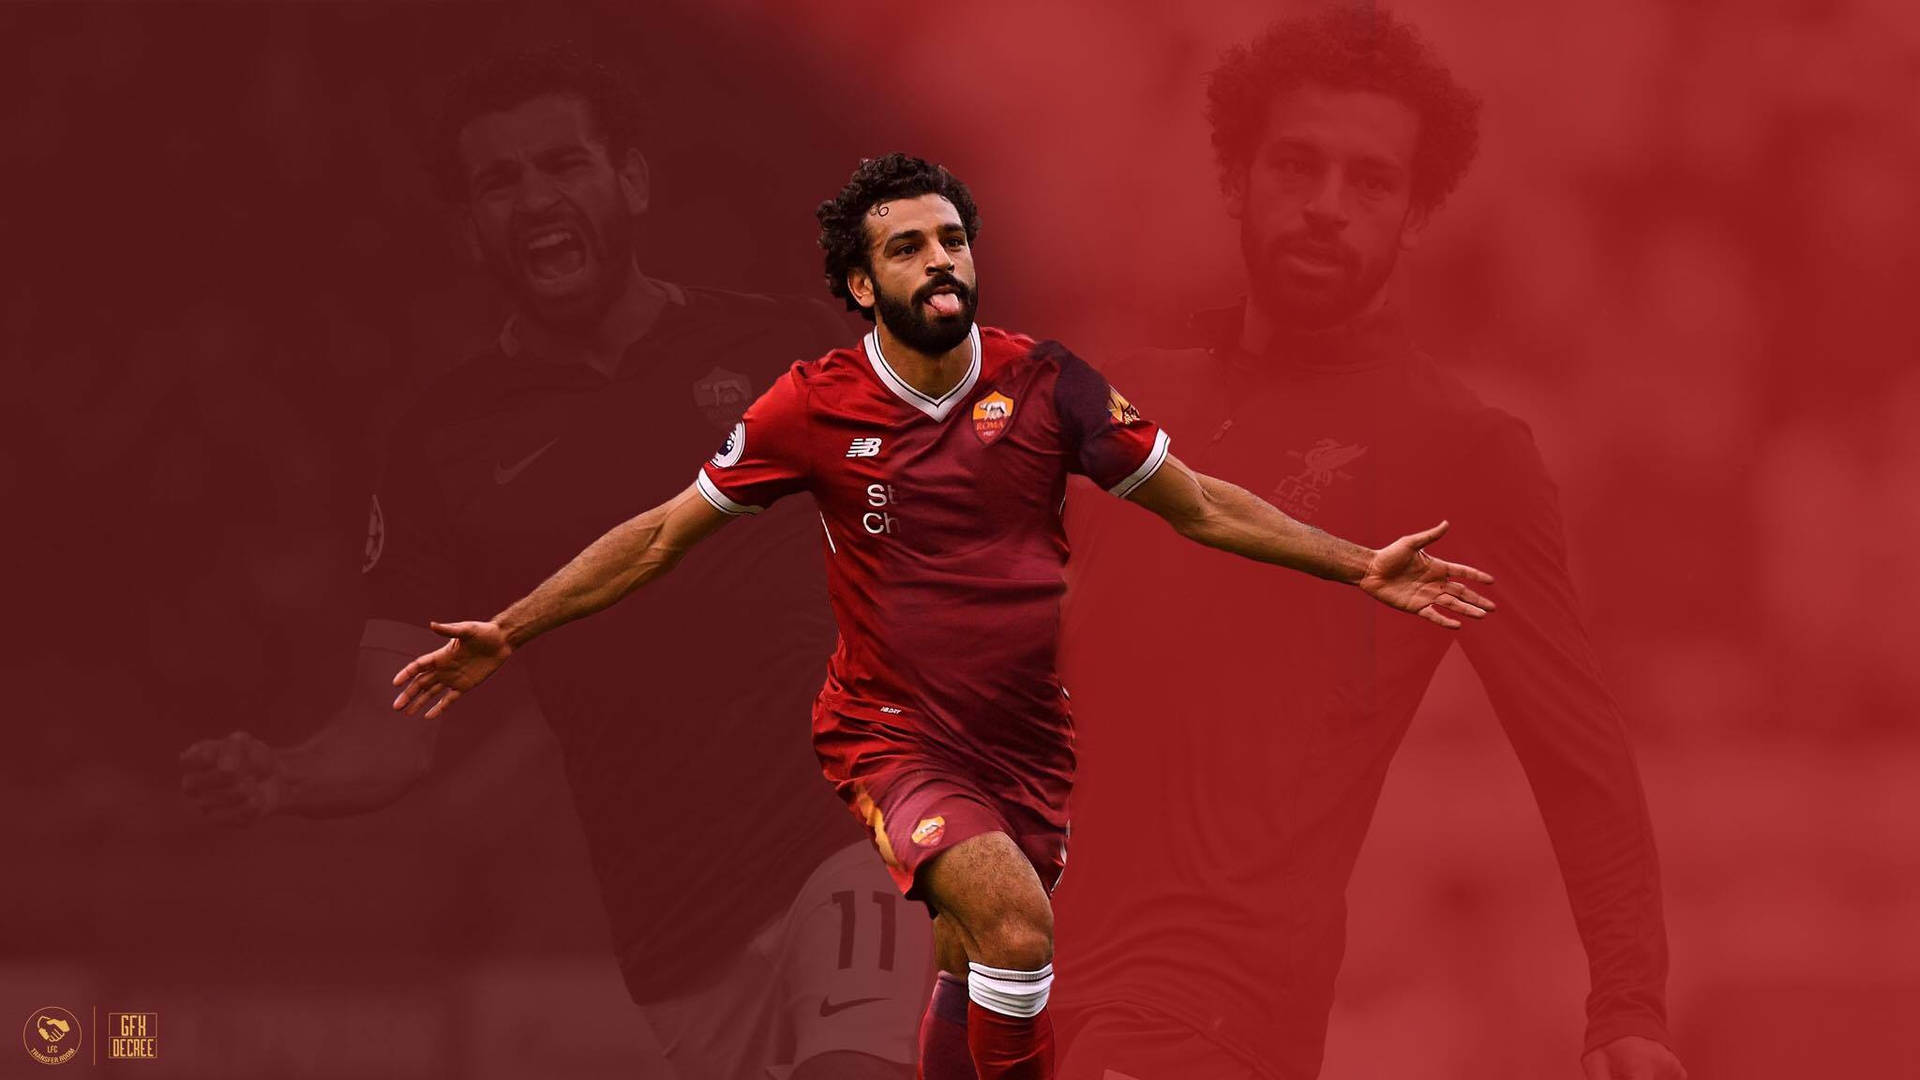 Mohamed Salah wallpaper by Nicolo69  Download on ZEDGE  13a0